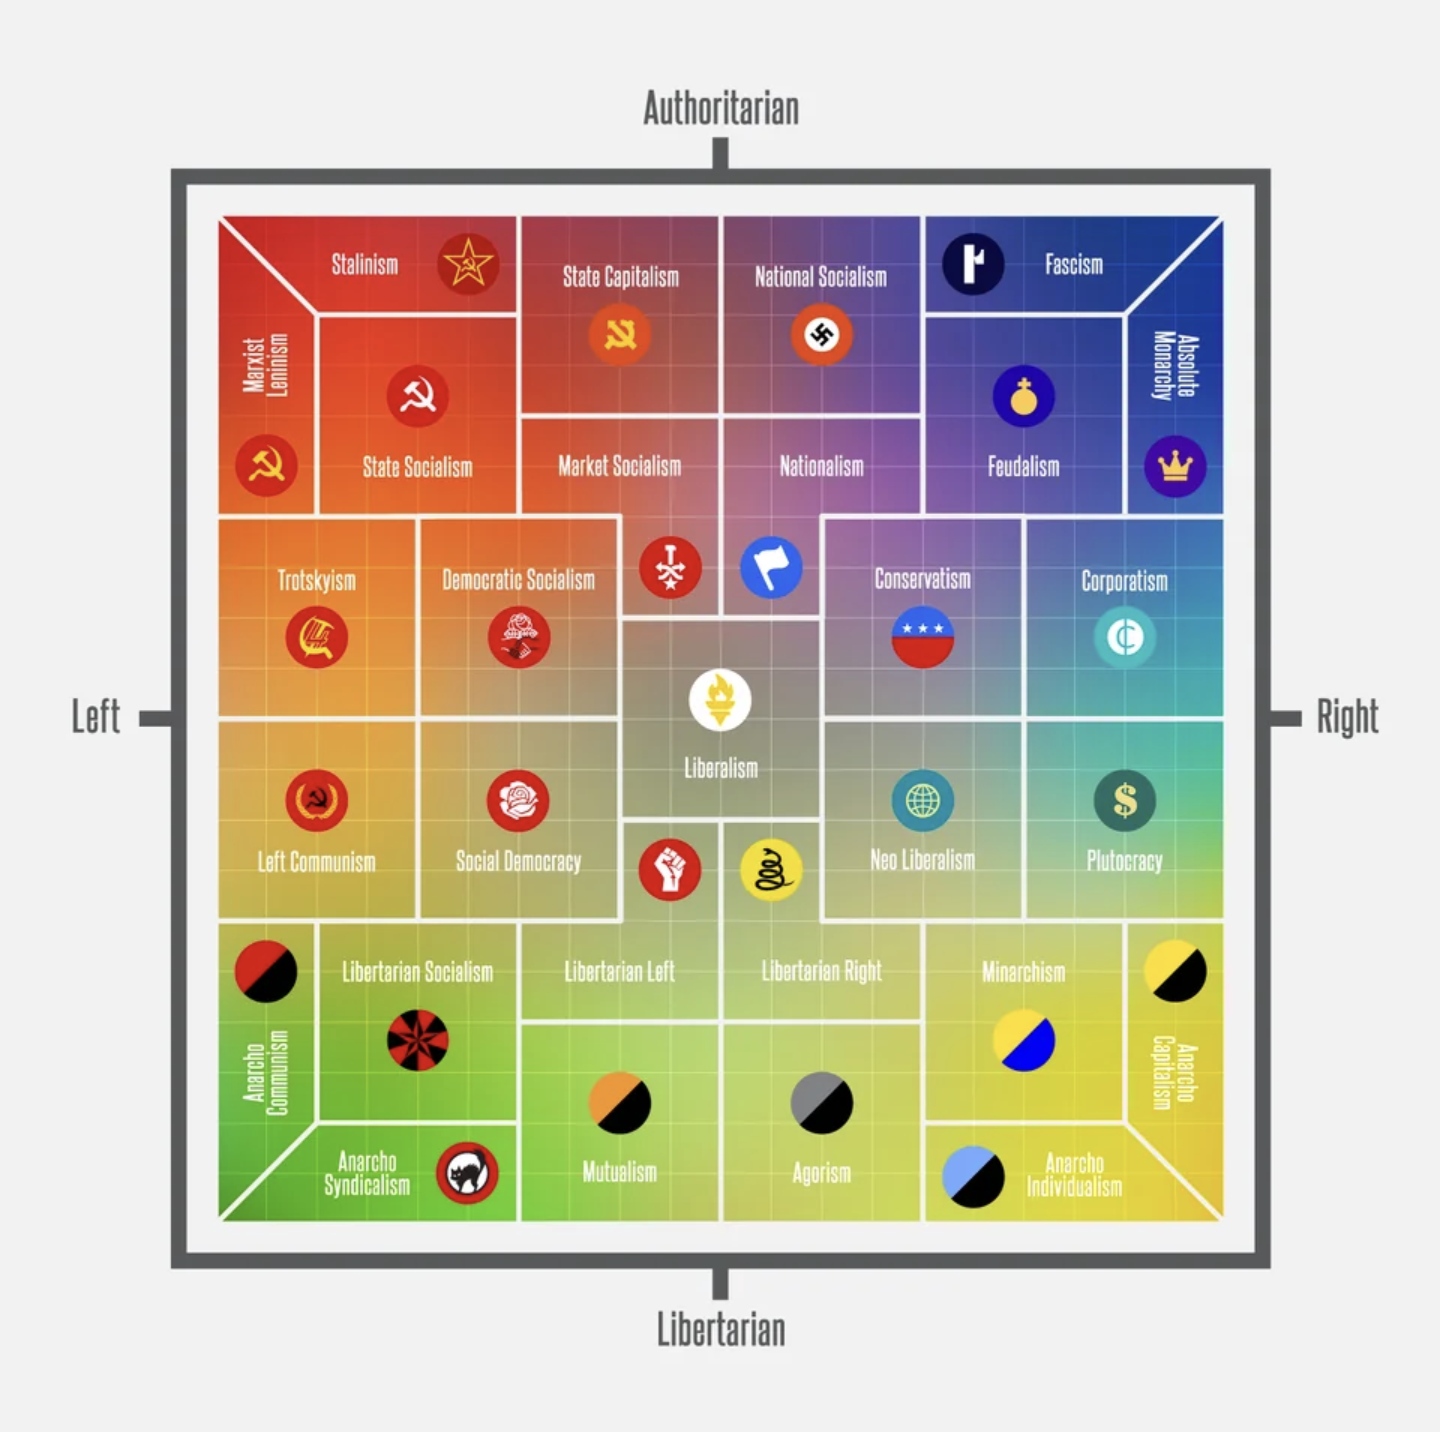 This graphic, from Reddit, is far from perfect but at least features mutualism and agorism, if potentially in the wrong quadrants.